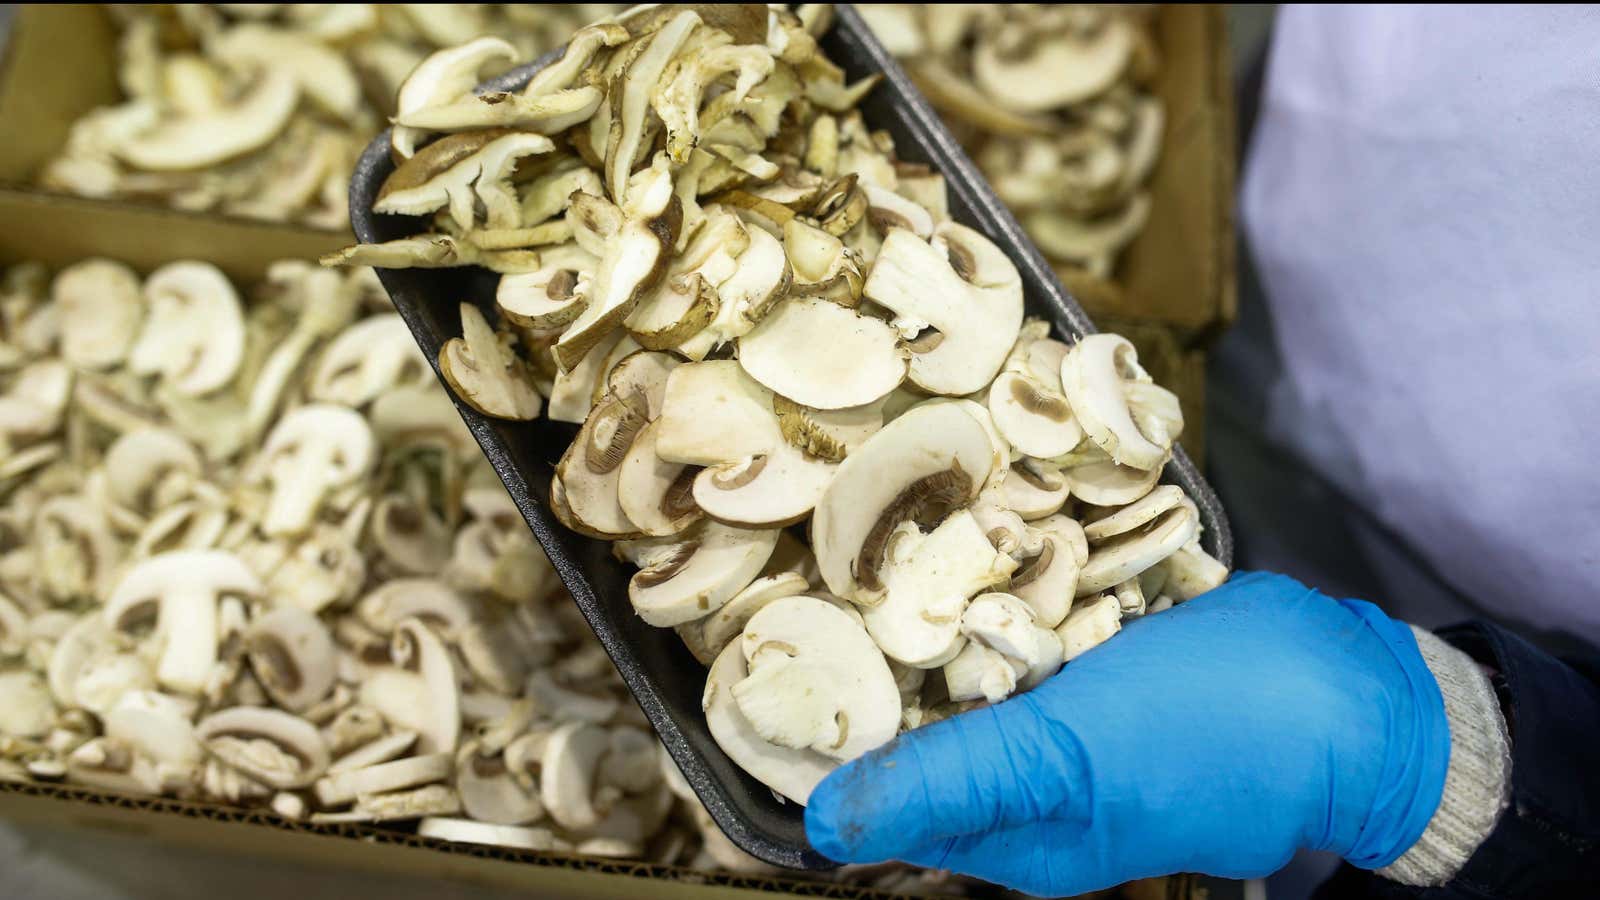 A farm worker packages commercial mushrooms.